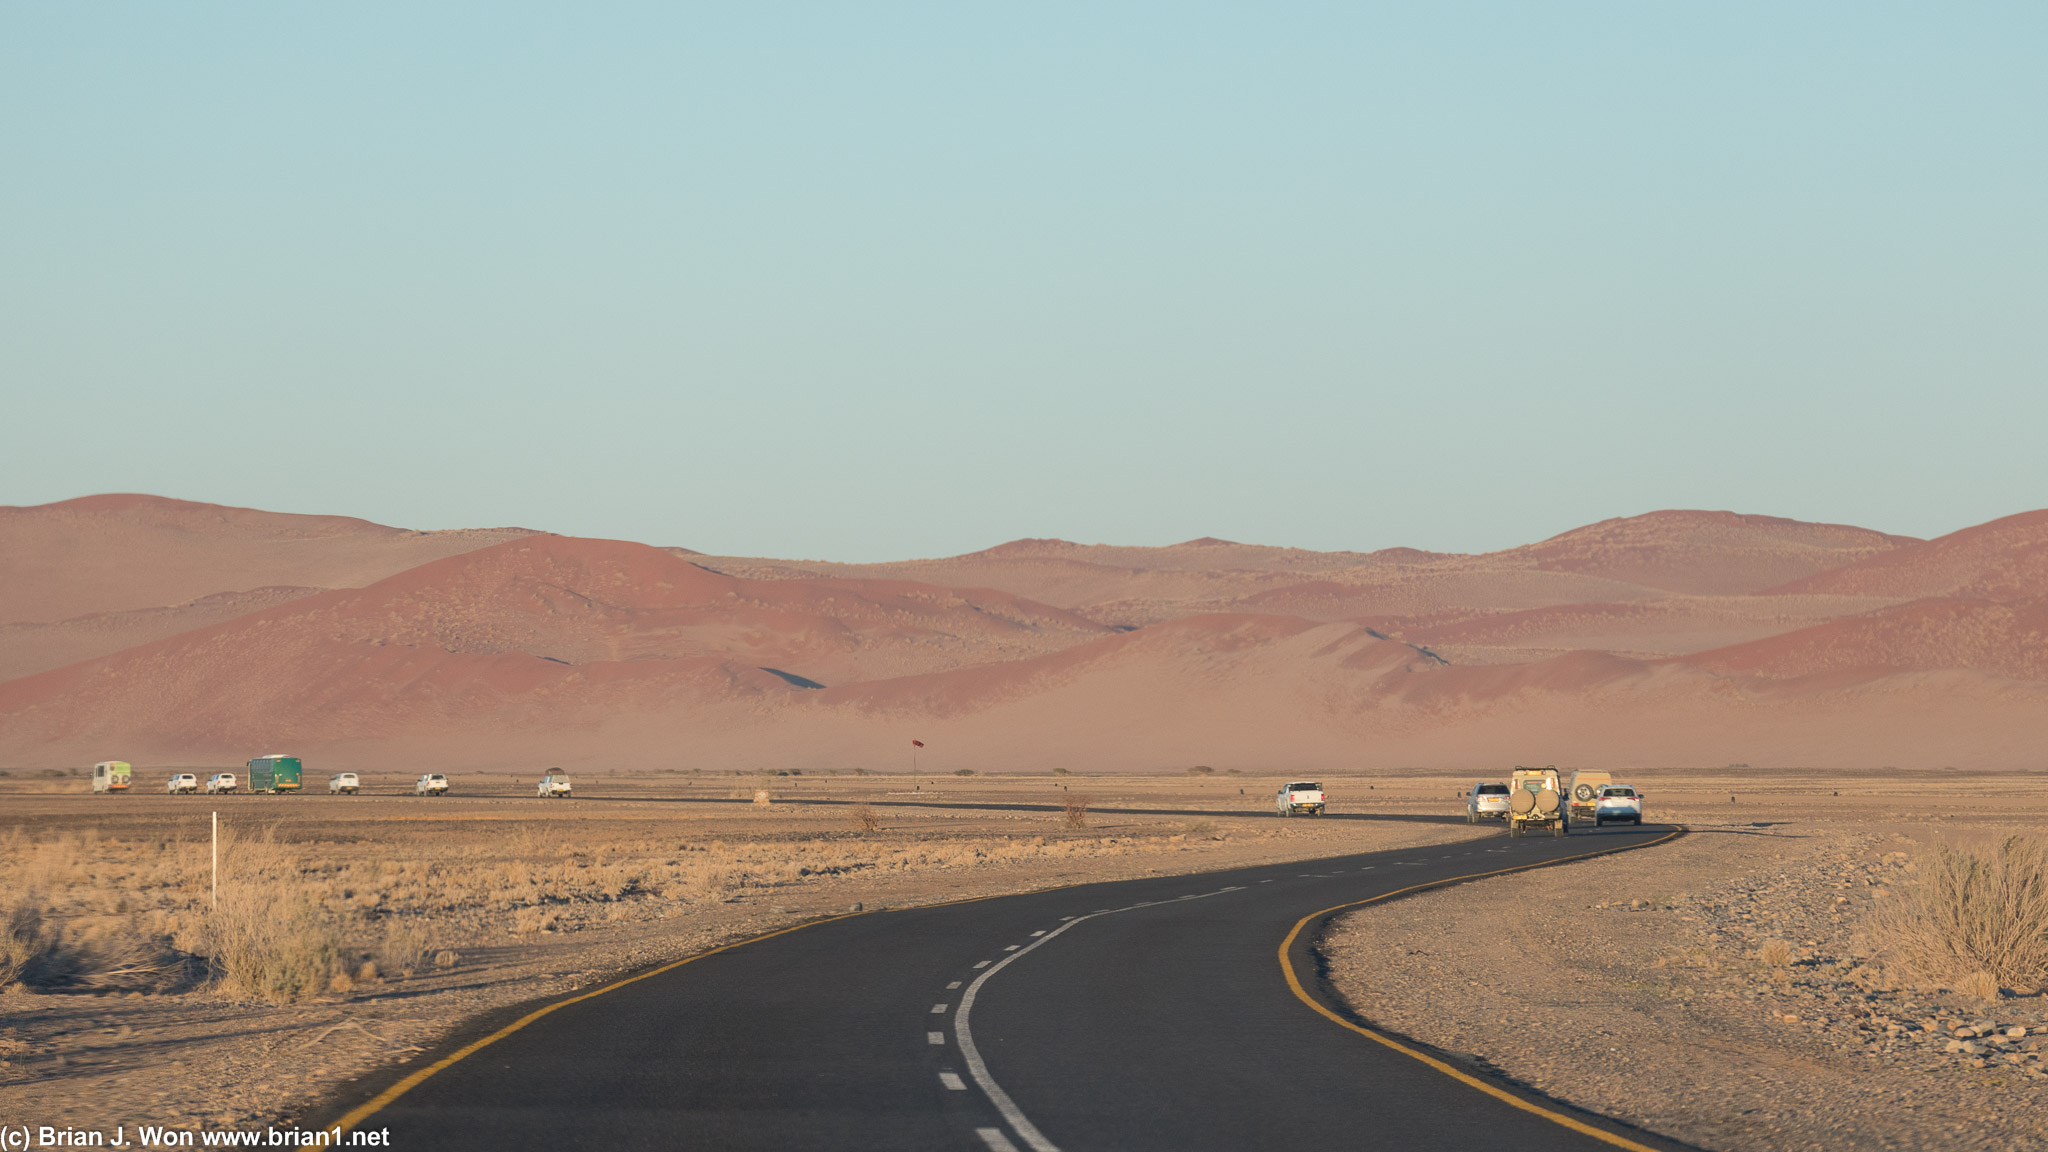 Some of the 18 vehicles ahead of us on the way into the heart of Namib-Naukluft National Park.